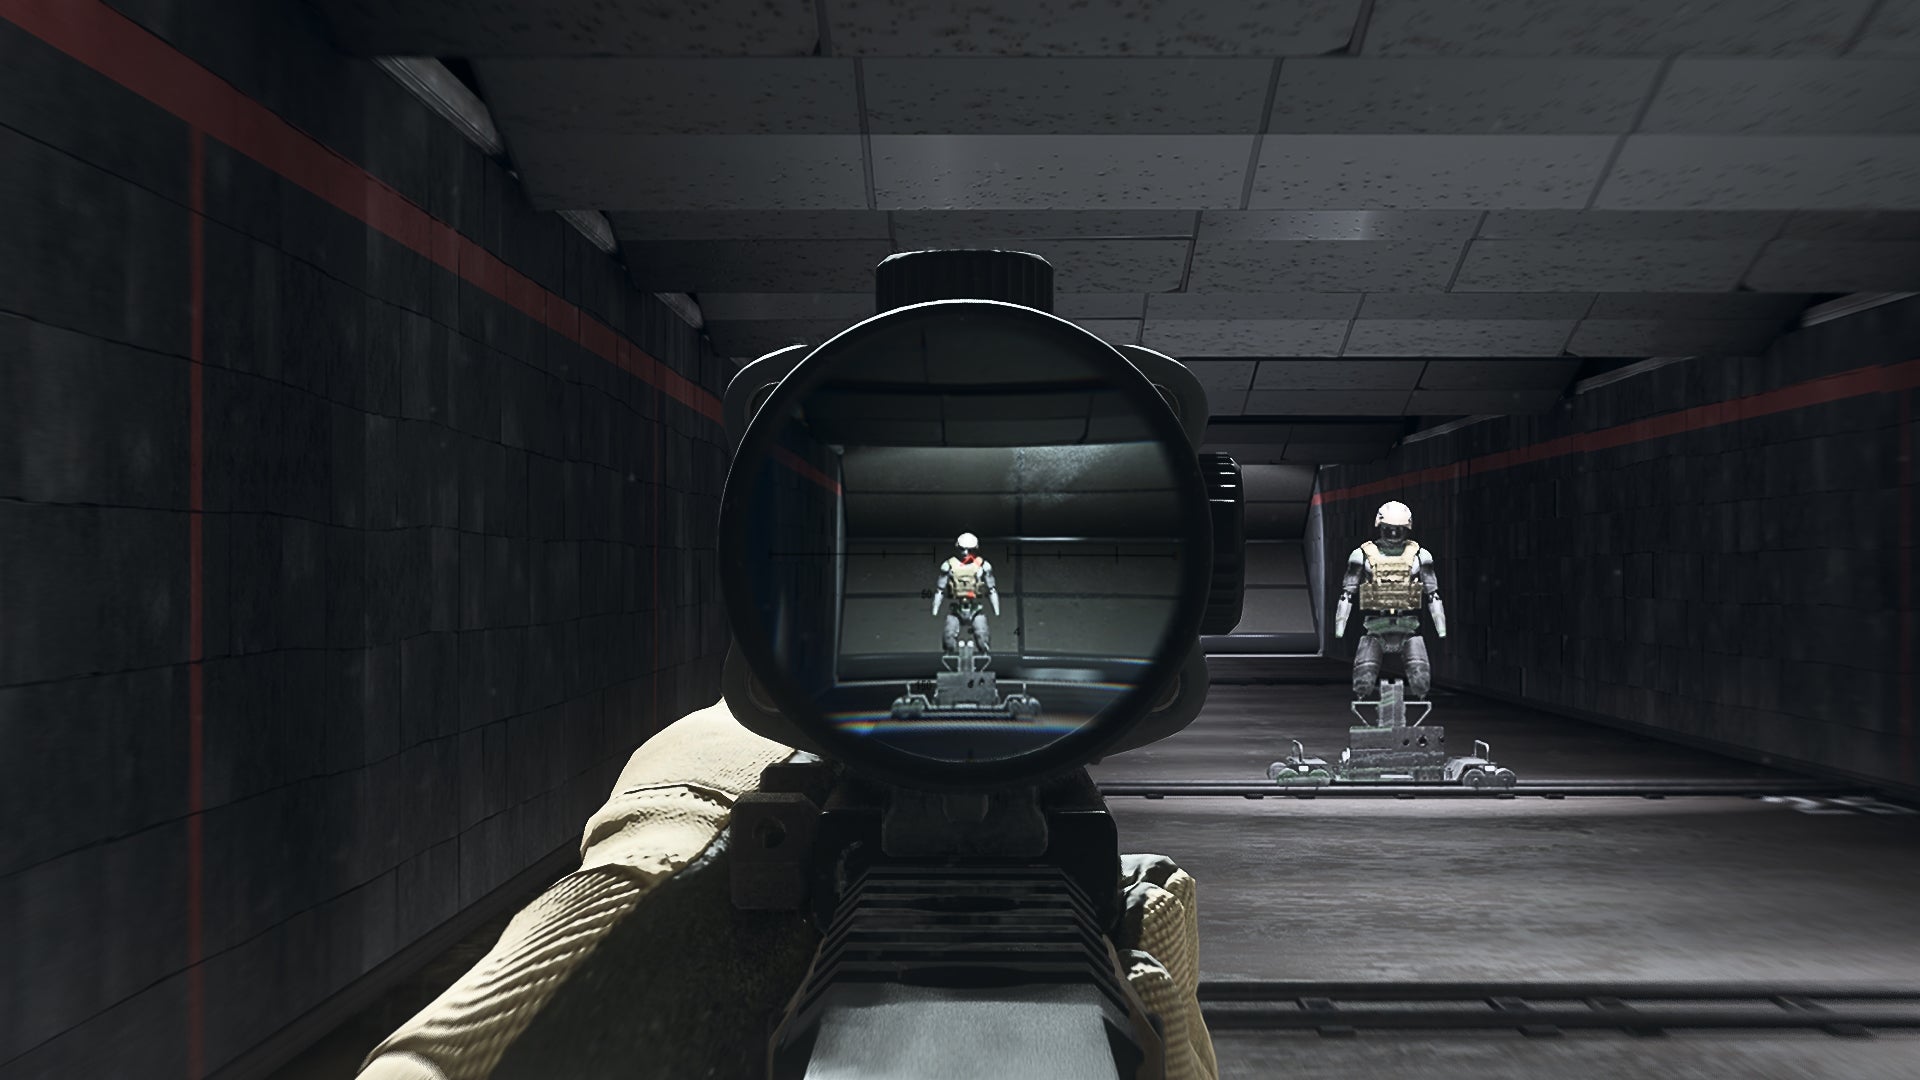 The player in Warzone 2.0 aims at a training dummy using the SZ Bullseye Optic optic attachment.